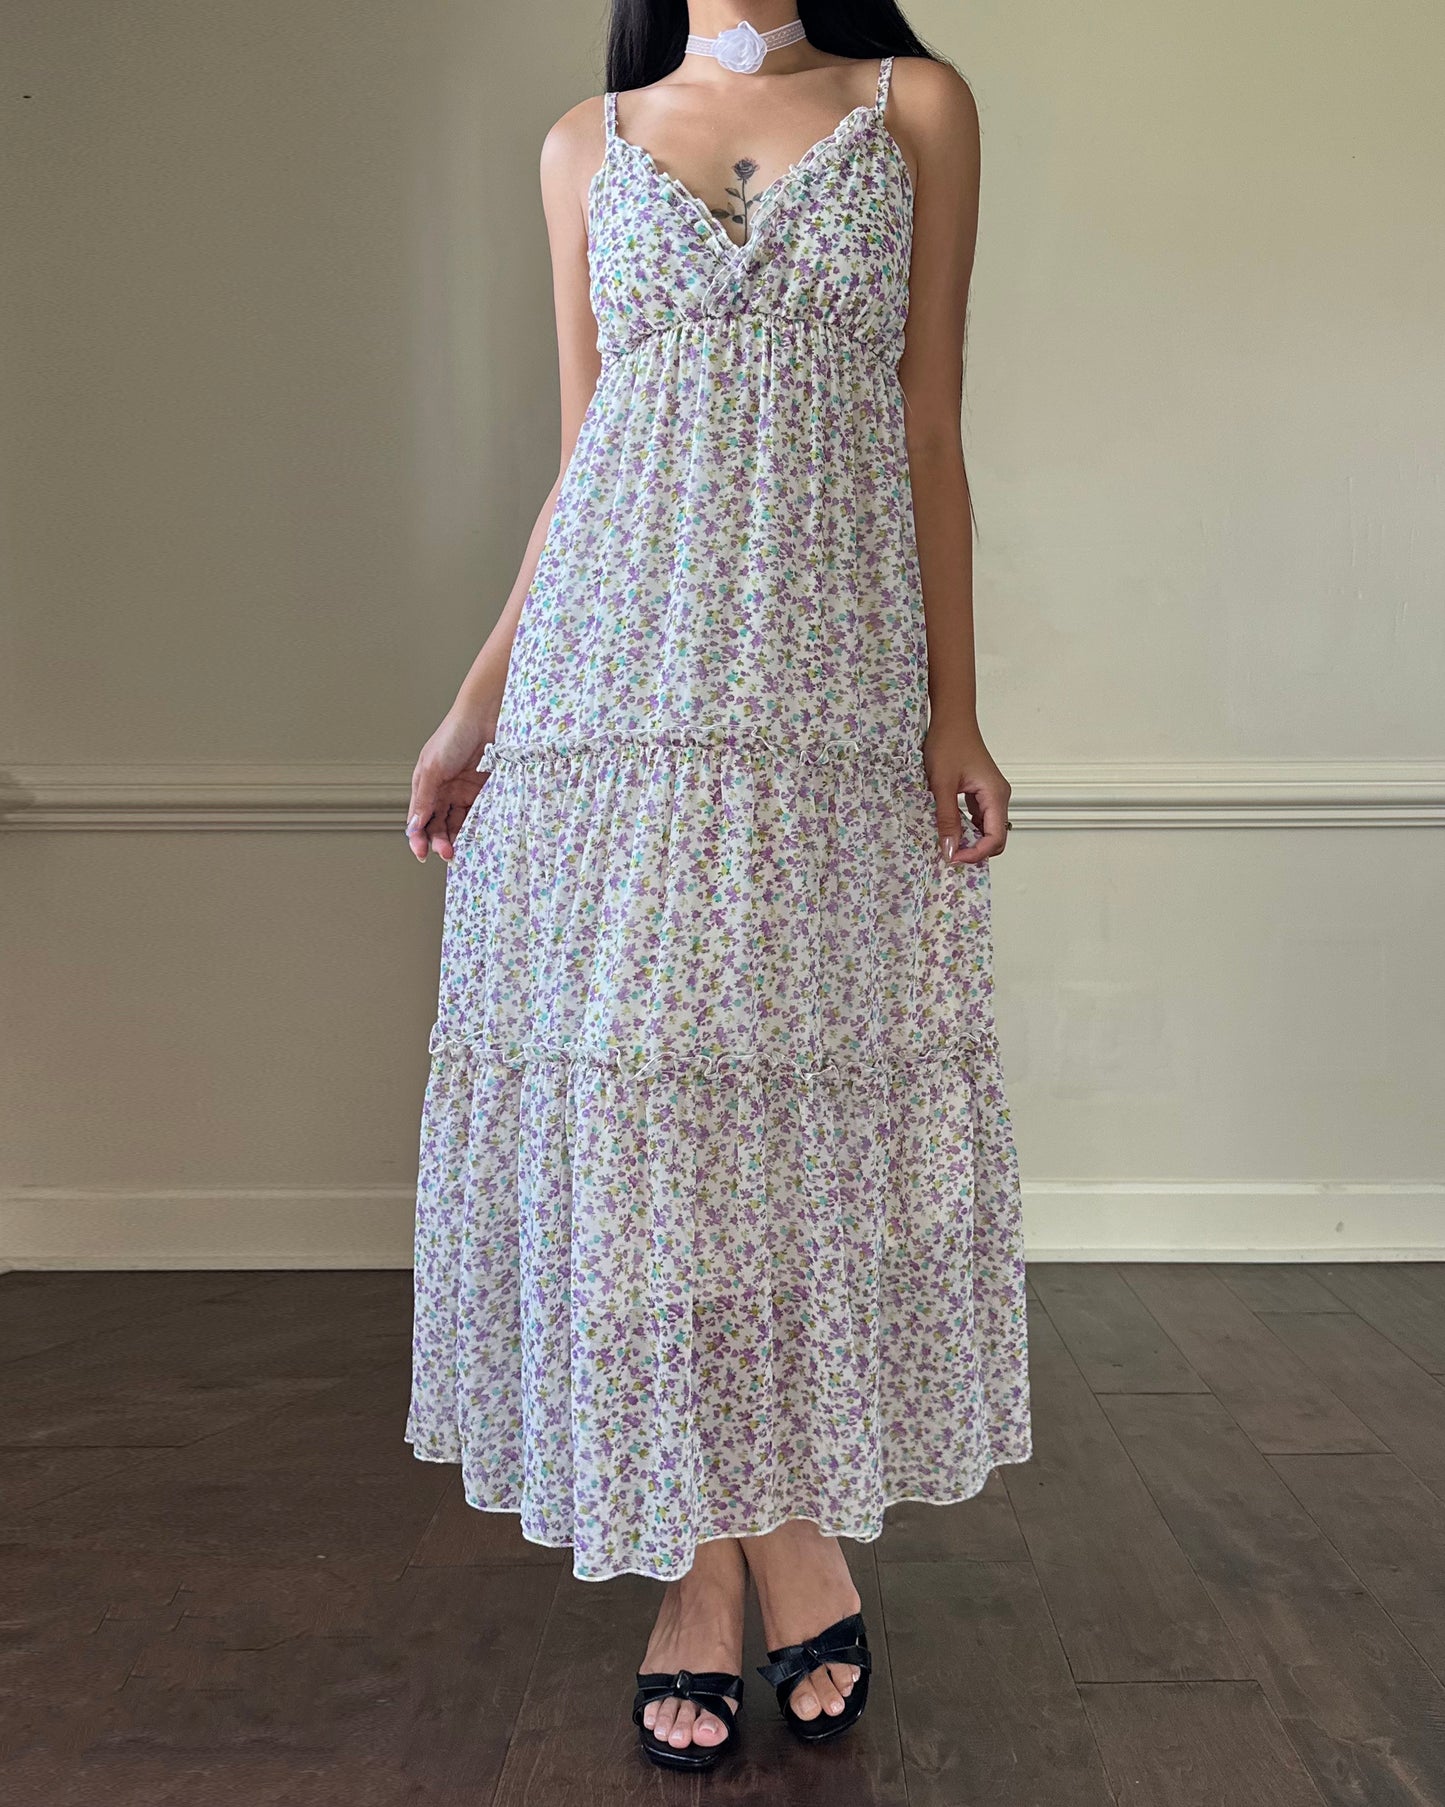 Vintage Soft White Maxi Dress featuring Ditsy Floral Prints